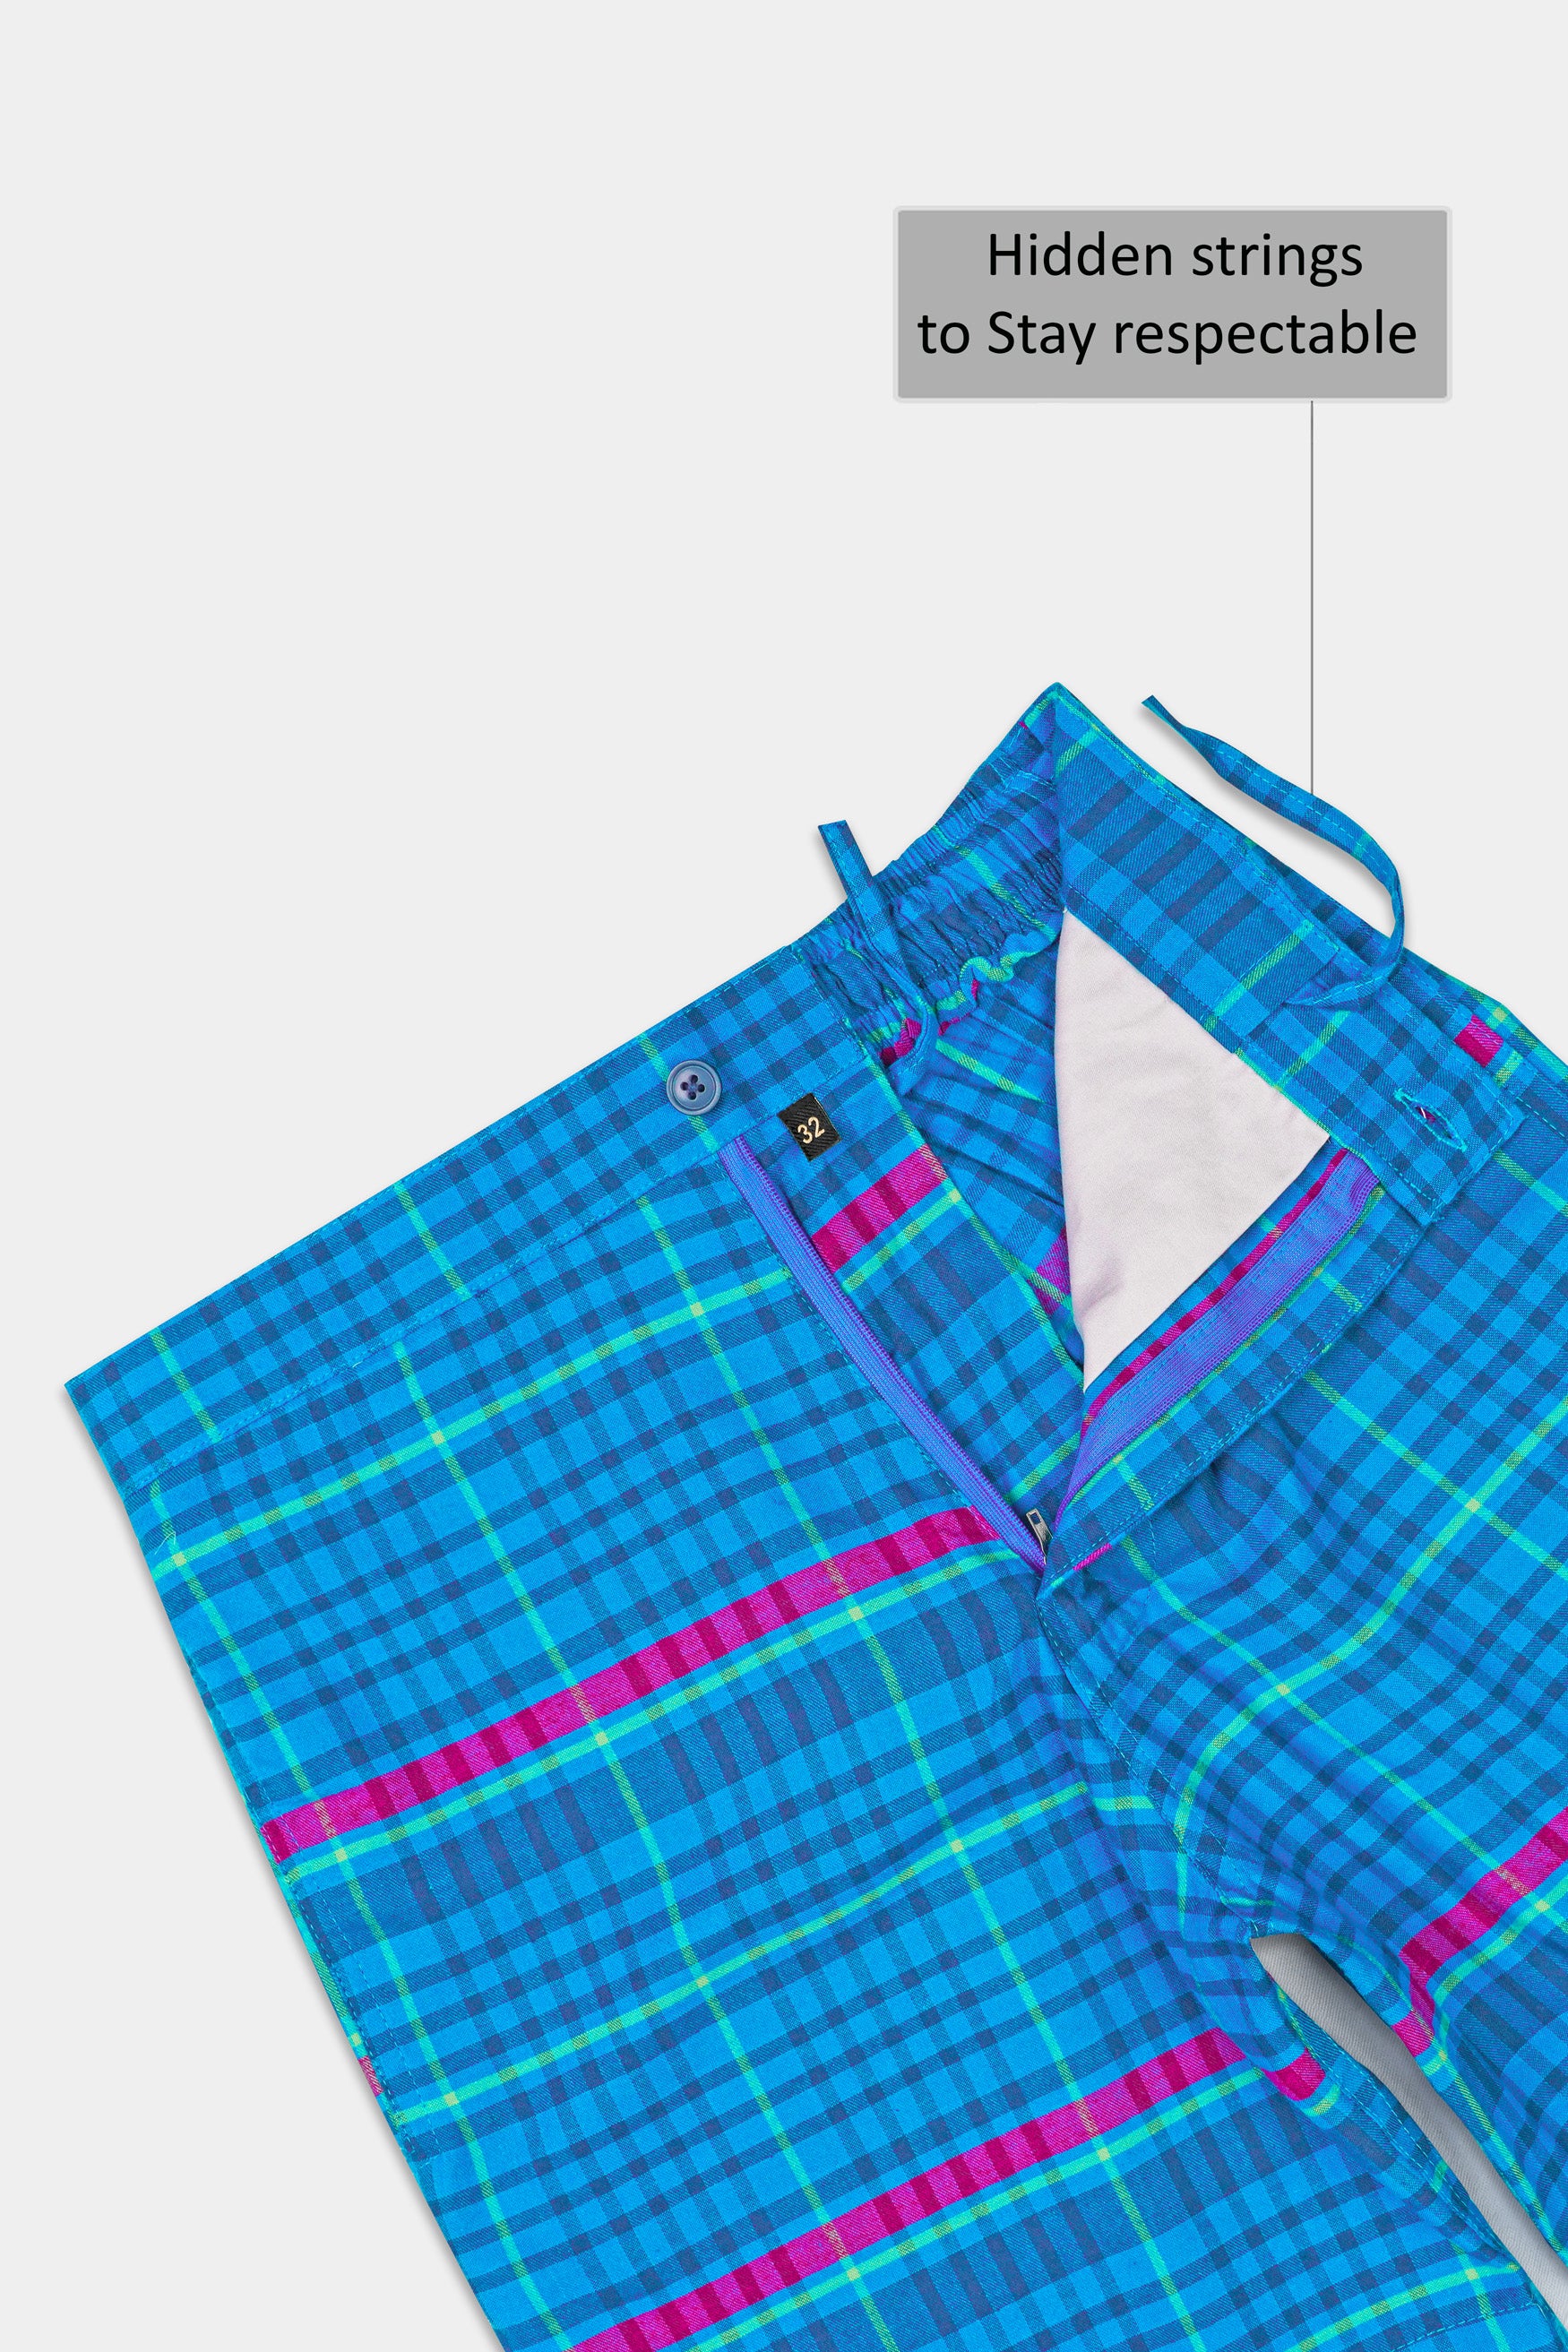 Curious Blue with Barney Pink Multicolor Checkered Chambray Shorts SR363-28, SR363-30, SR363-32, SR363-34, SR363-36, SR363-38, SR363-40, SR363-42, SR363-44